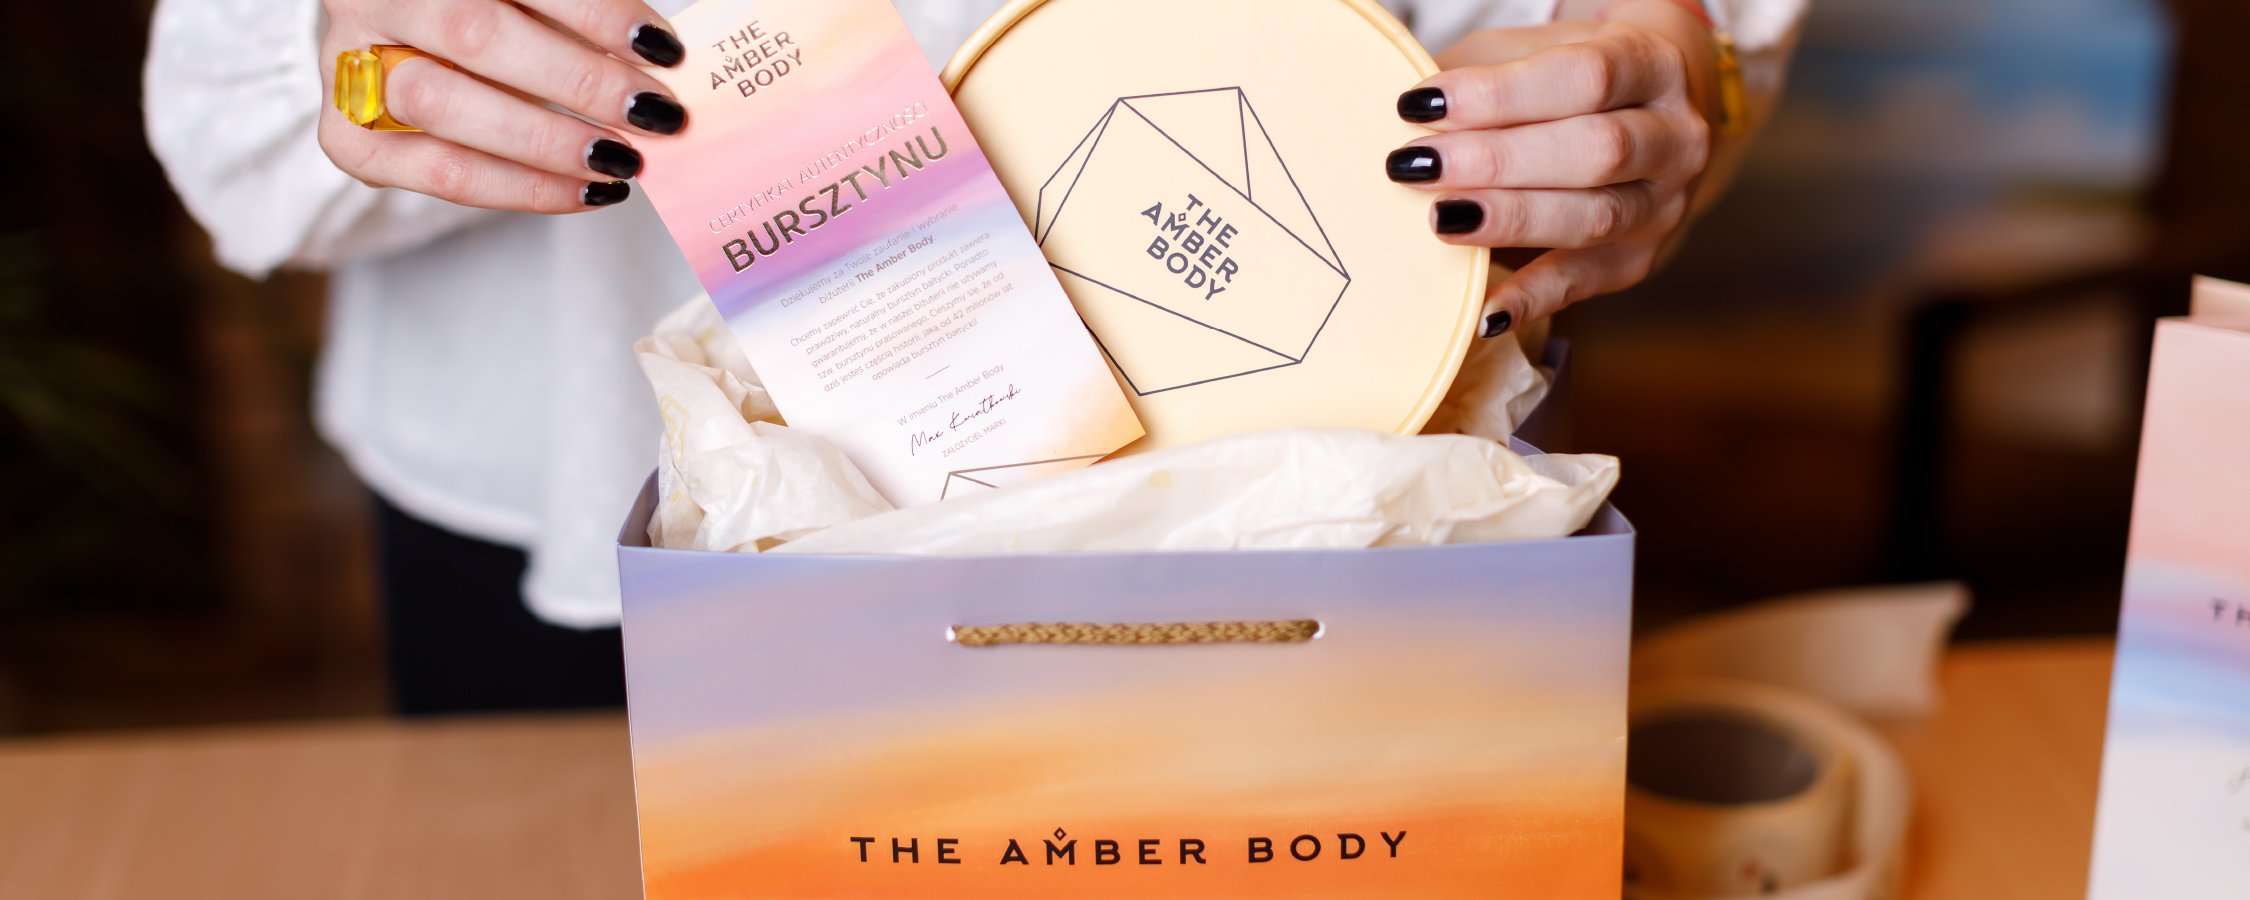 The Amber Body